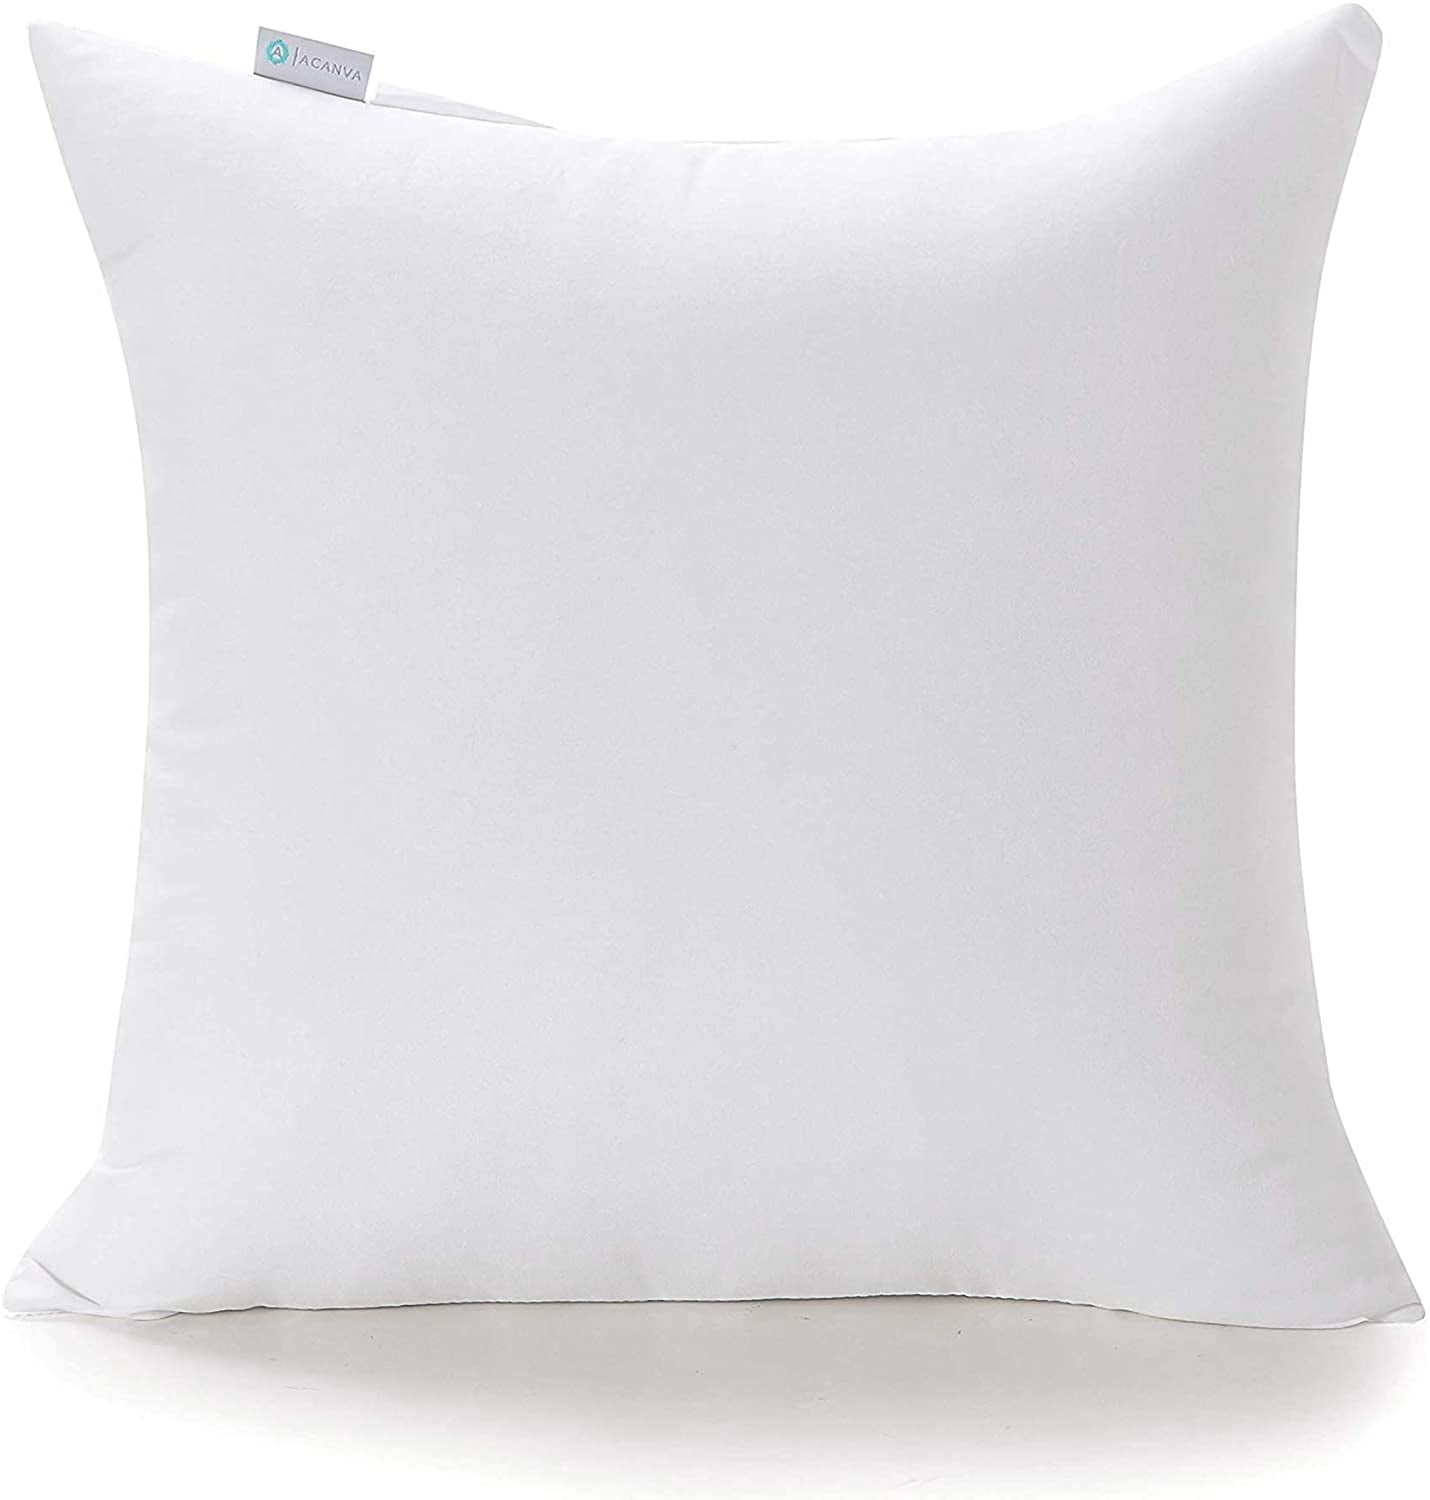 Pillow Insert Form Sham Stuffer Square Set of 4-18"x18" Polyester RB and Co. 